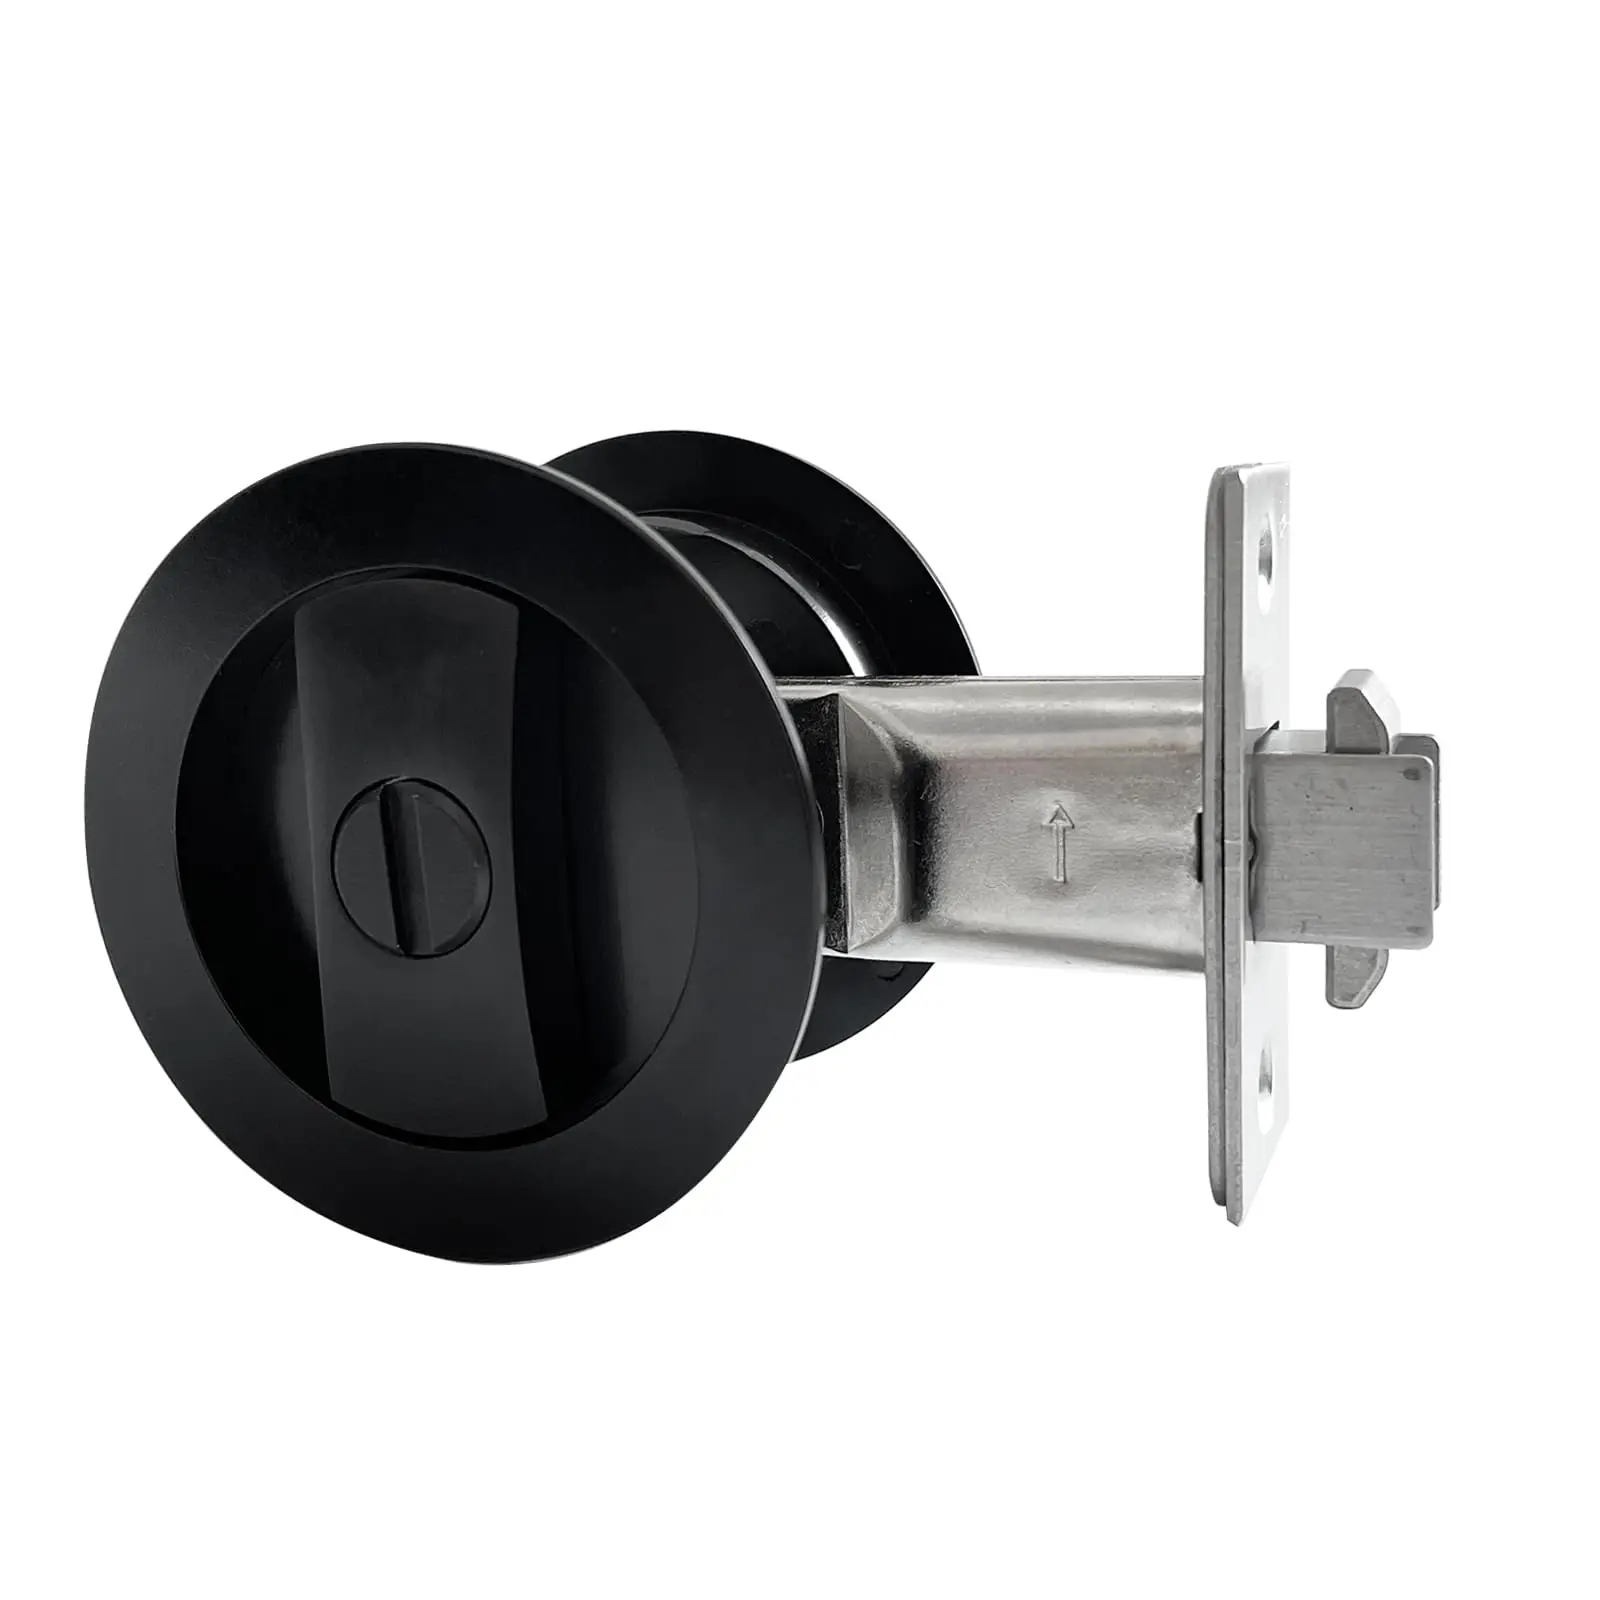 

Round Pocket Door Lock with Keys Recessed 2 Sided Handle Hardware for Privacy Barn Door and Sliding Door with Latch